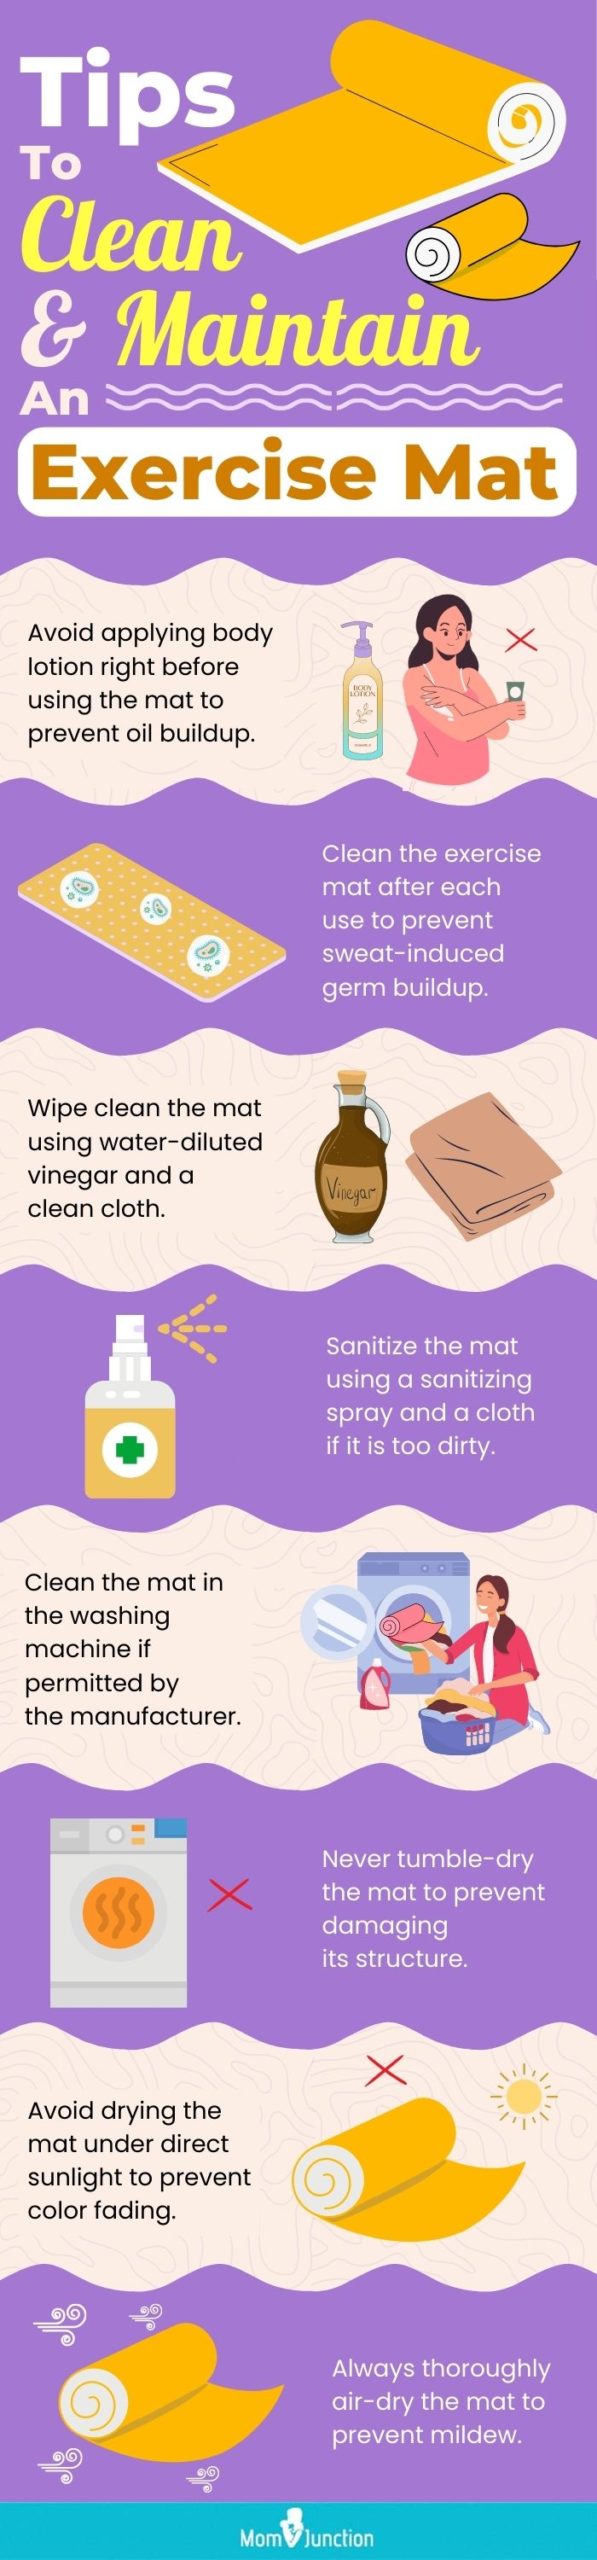 Tips To Clean And Maintain An Exercise Mat (infographic)